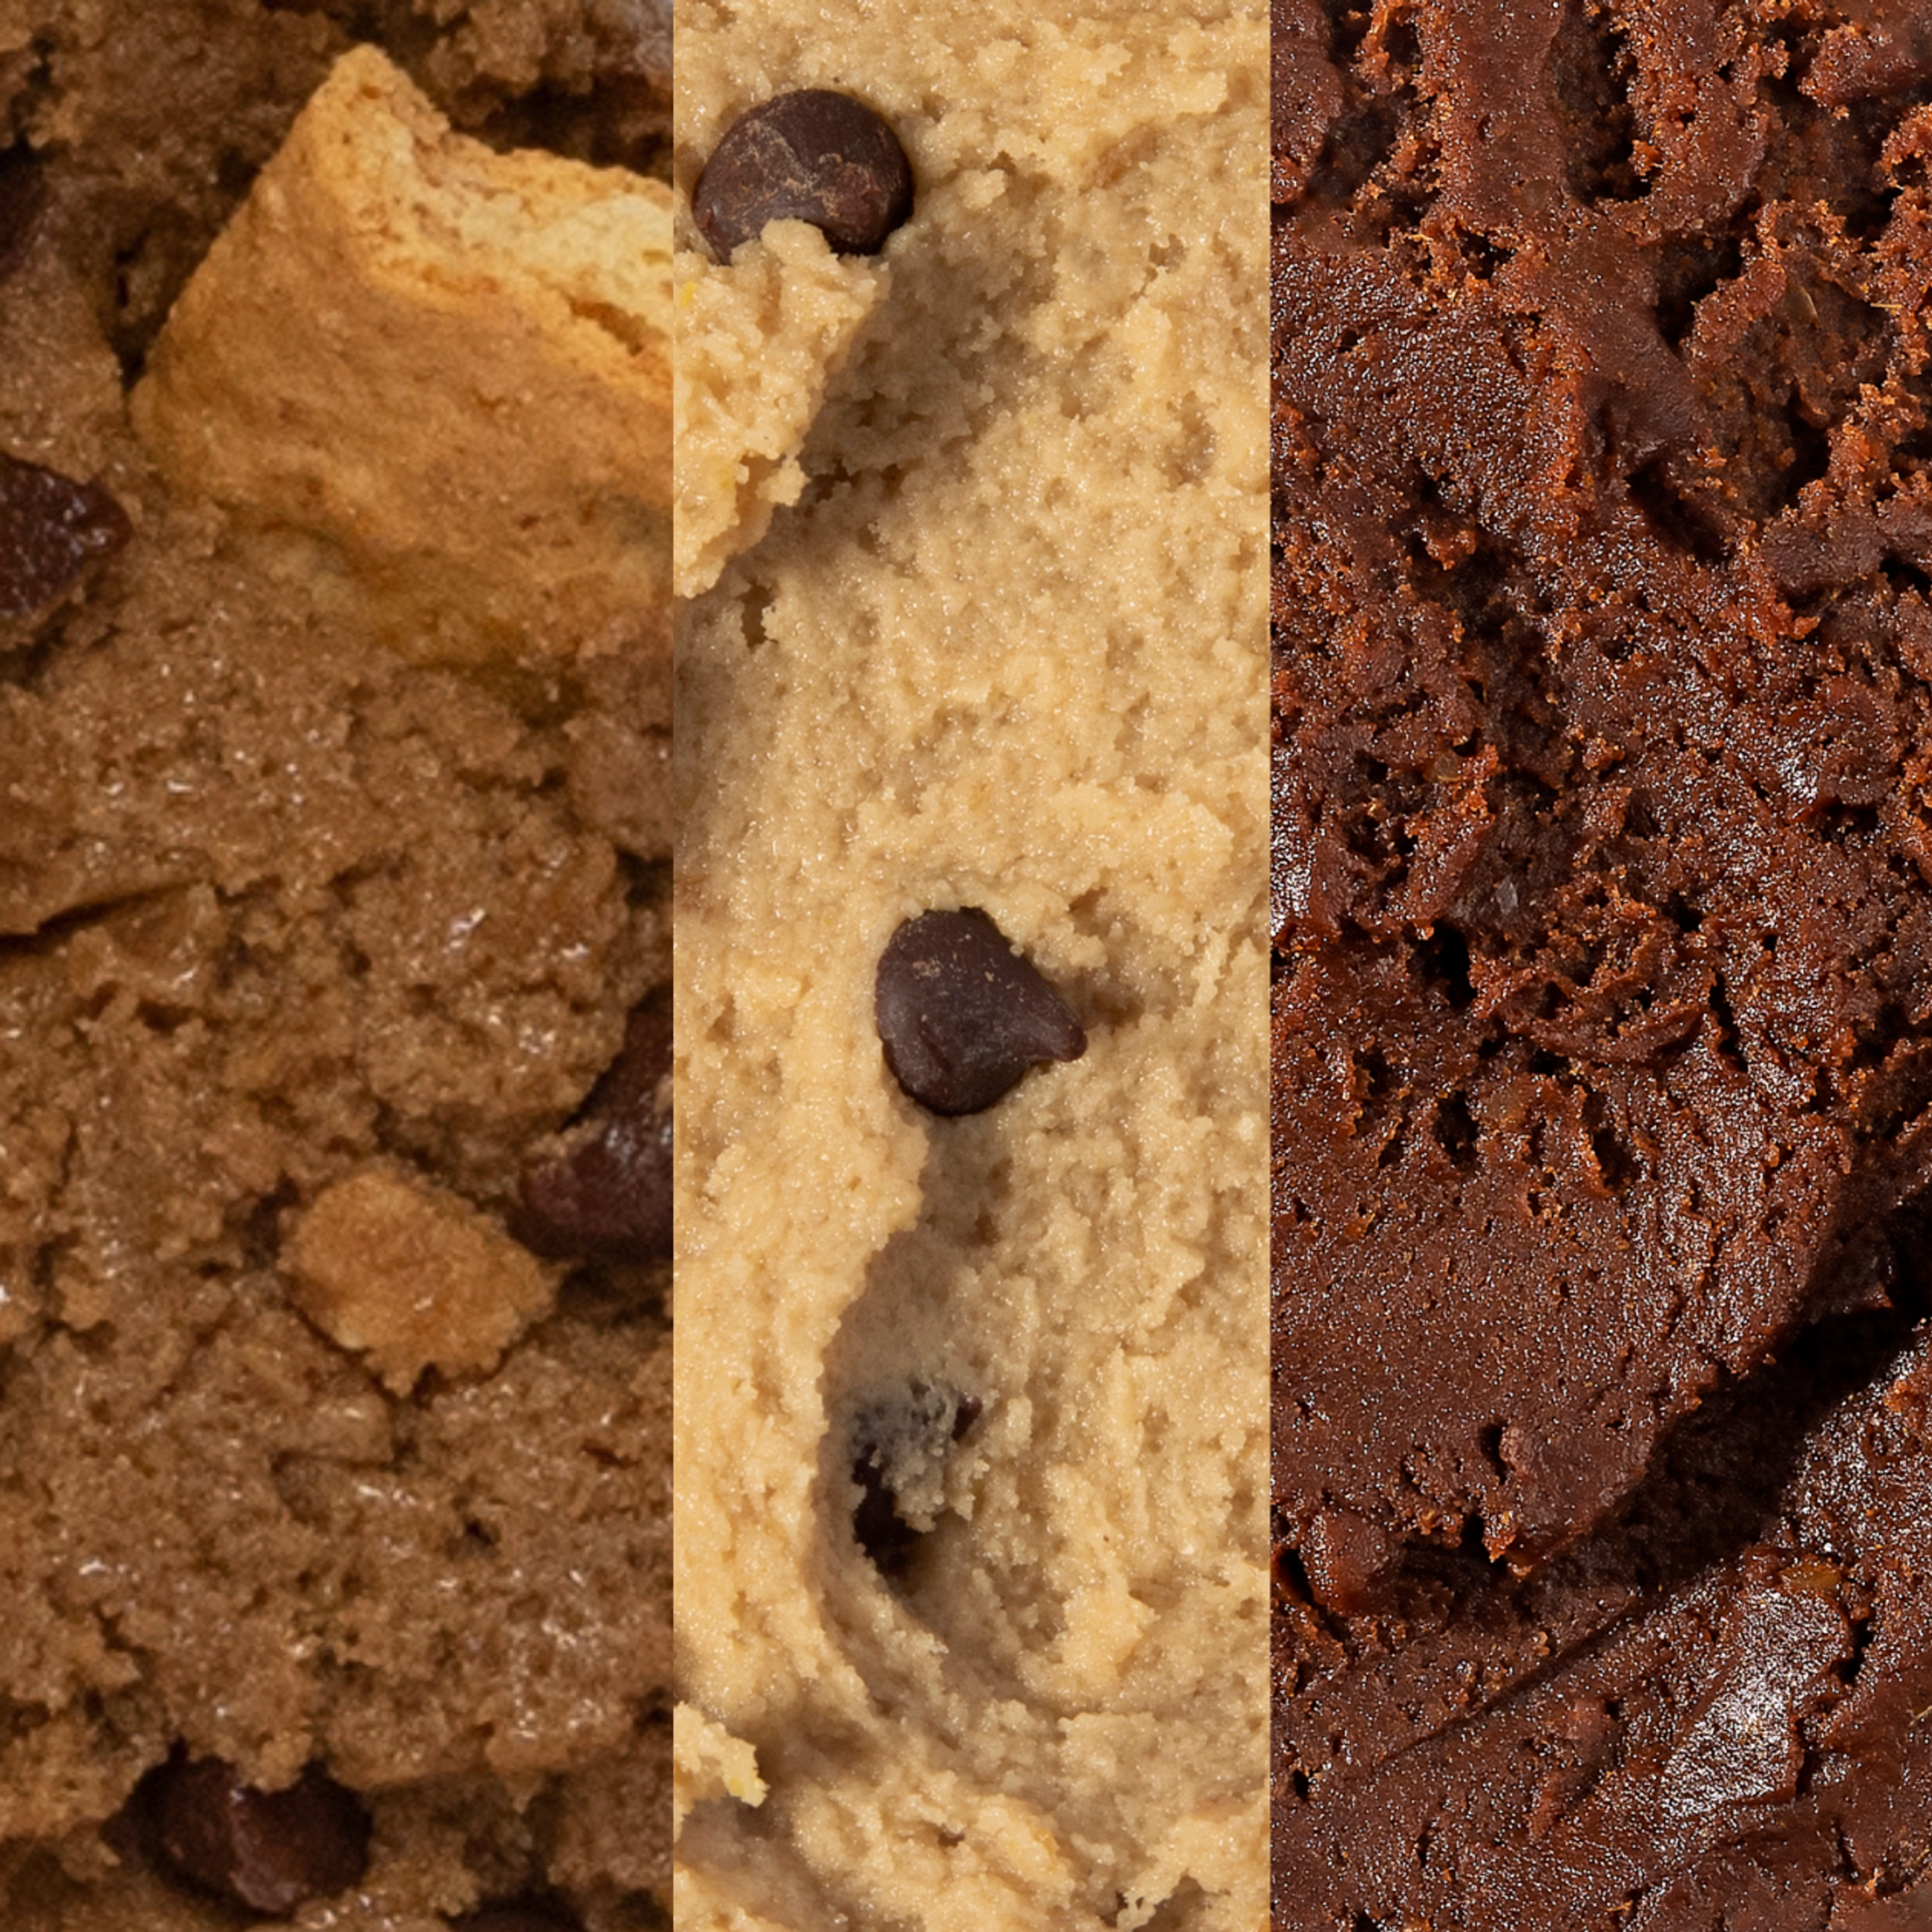 Chocoholic Cookie Dough 3-Pack Collection